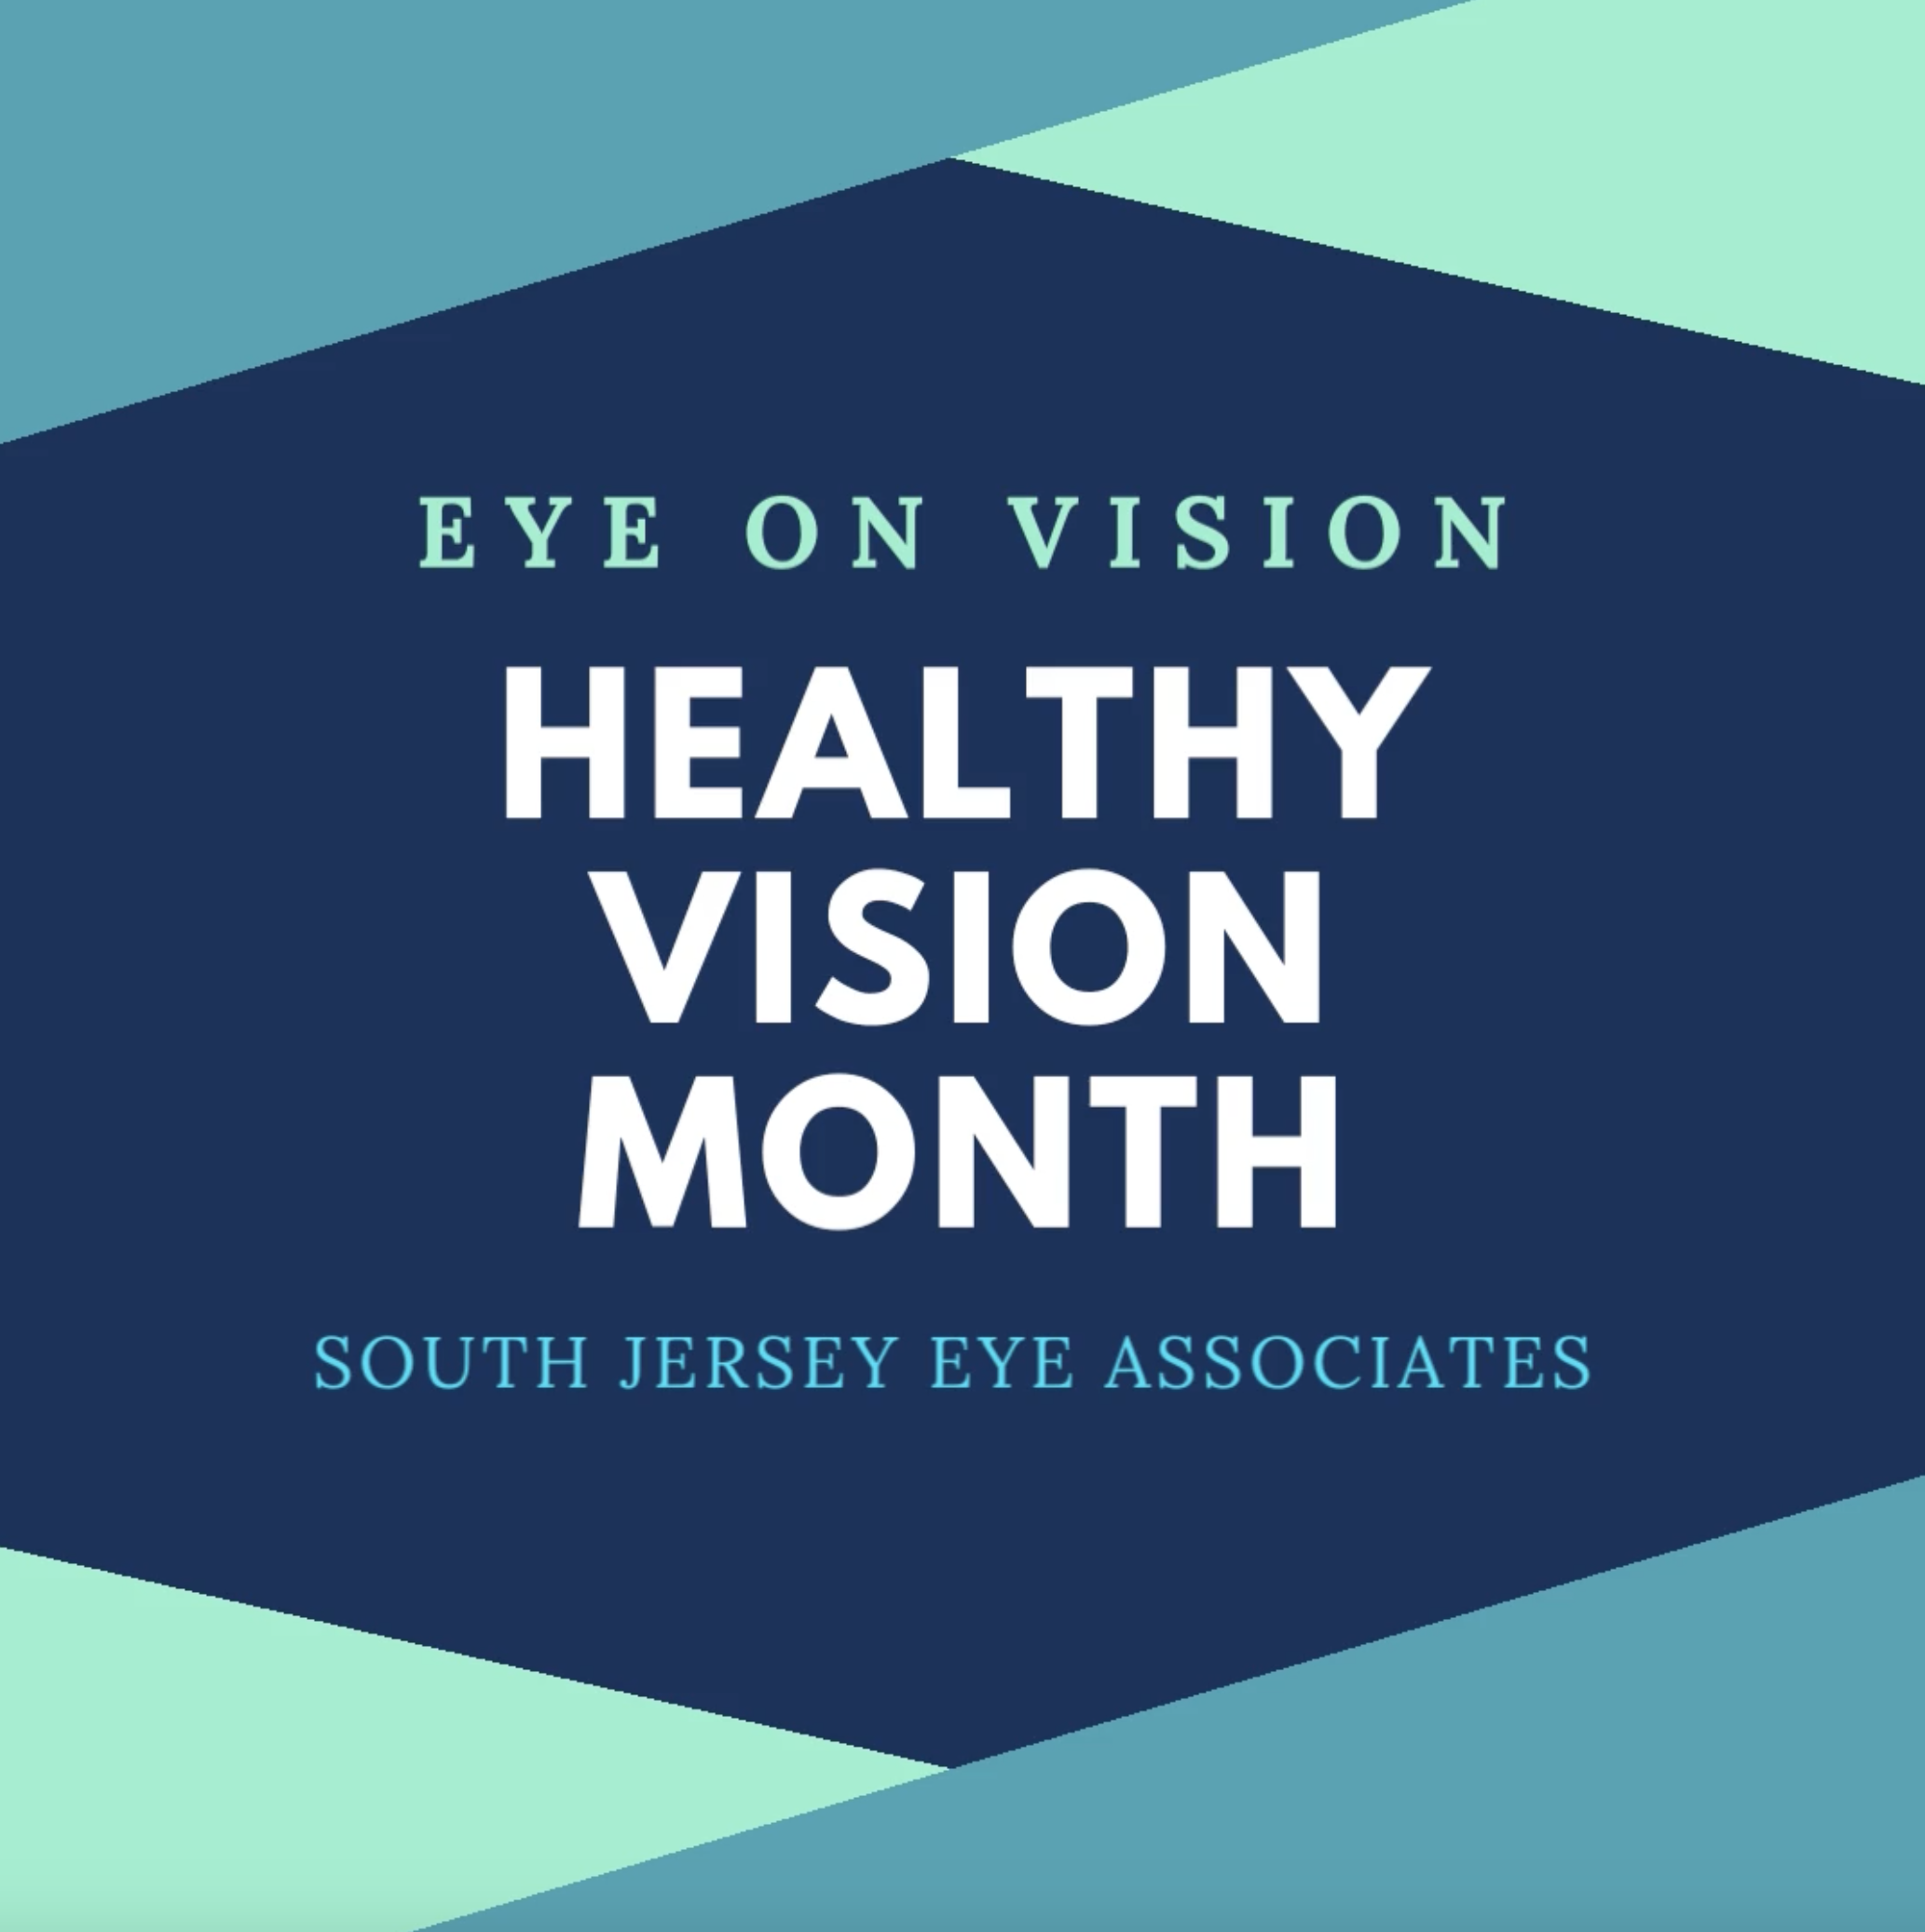 EYE ON VISION: HEALTHY VISION MONTH